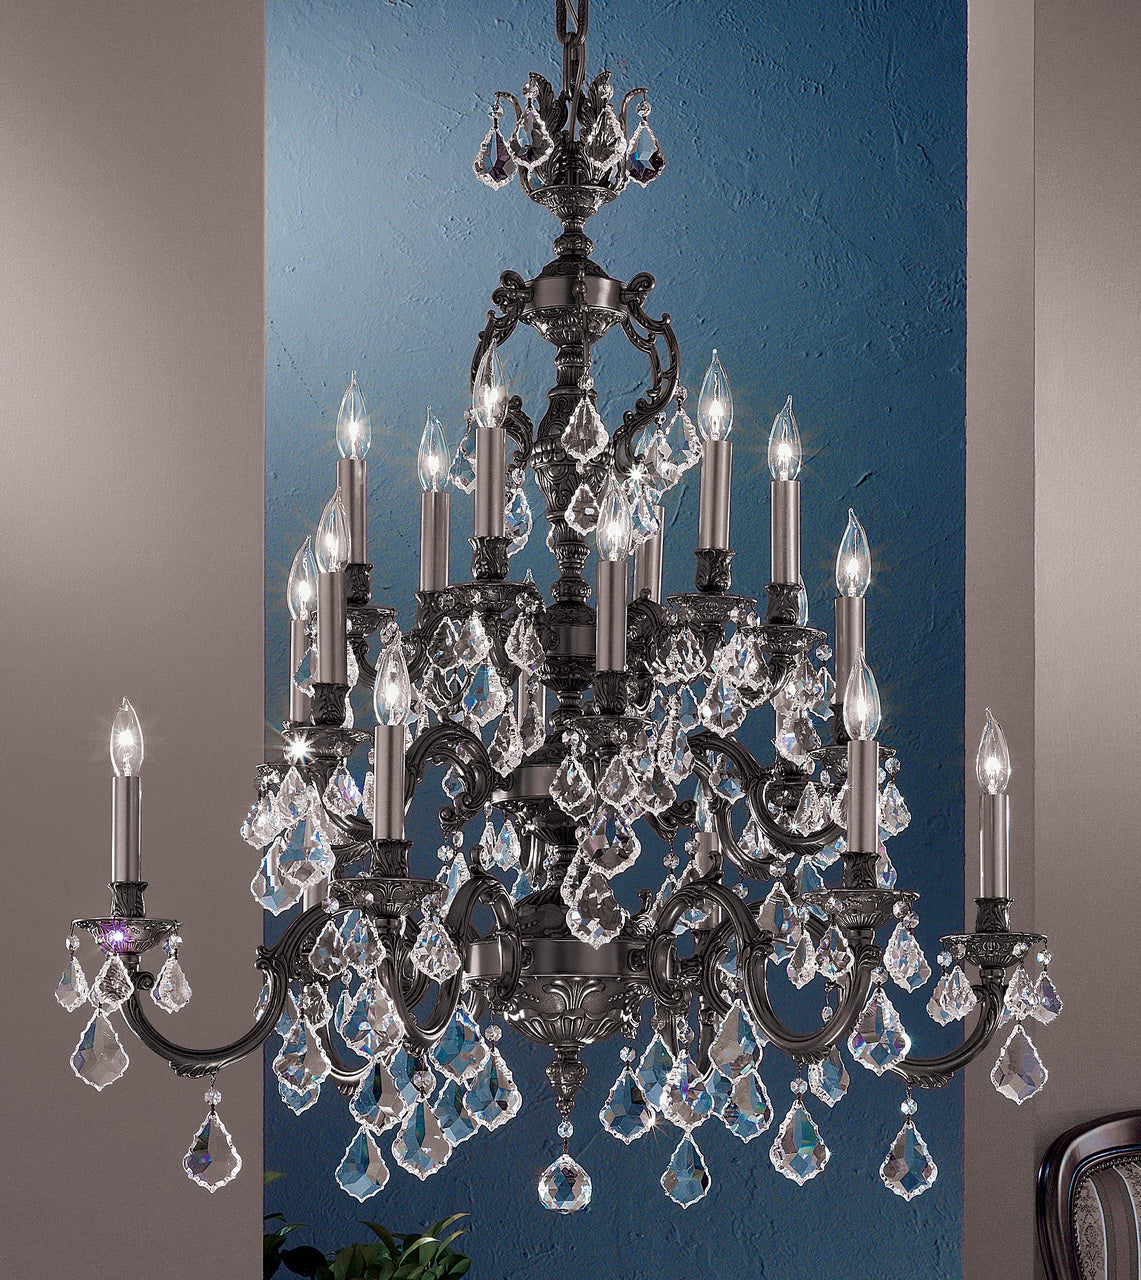 Classic Lighting 57370 AGP S Chateau Crystal Chandelier in Aged Pewter (Imported from Spain)